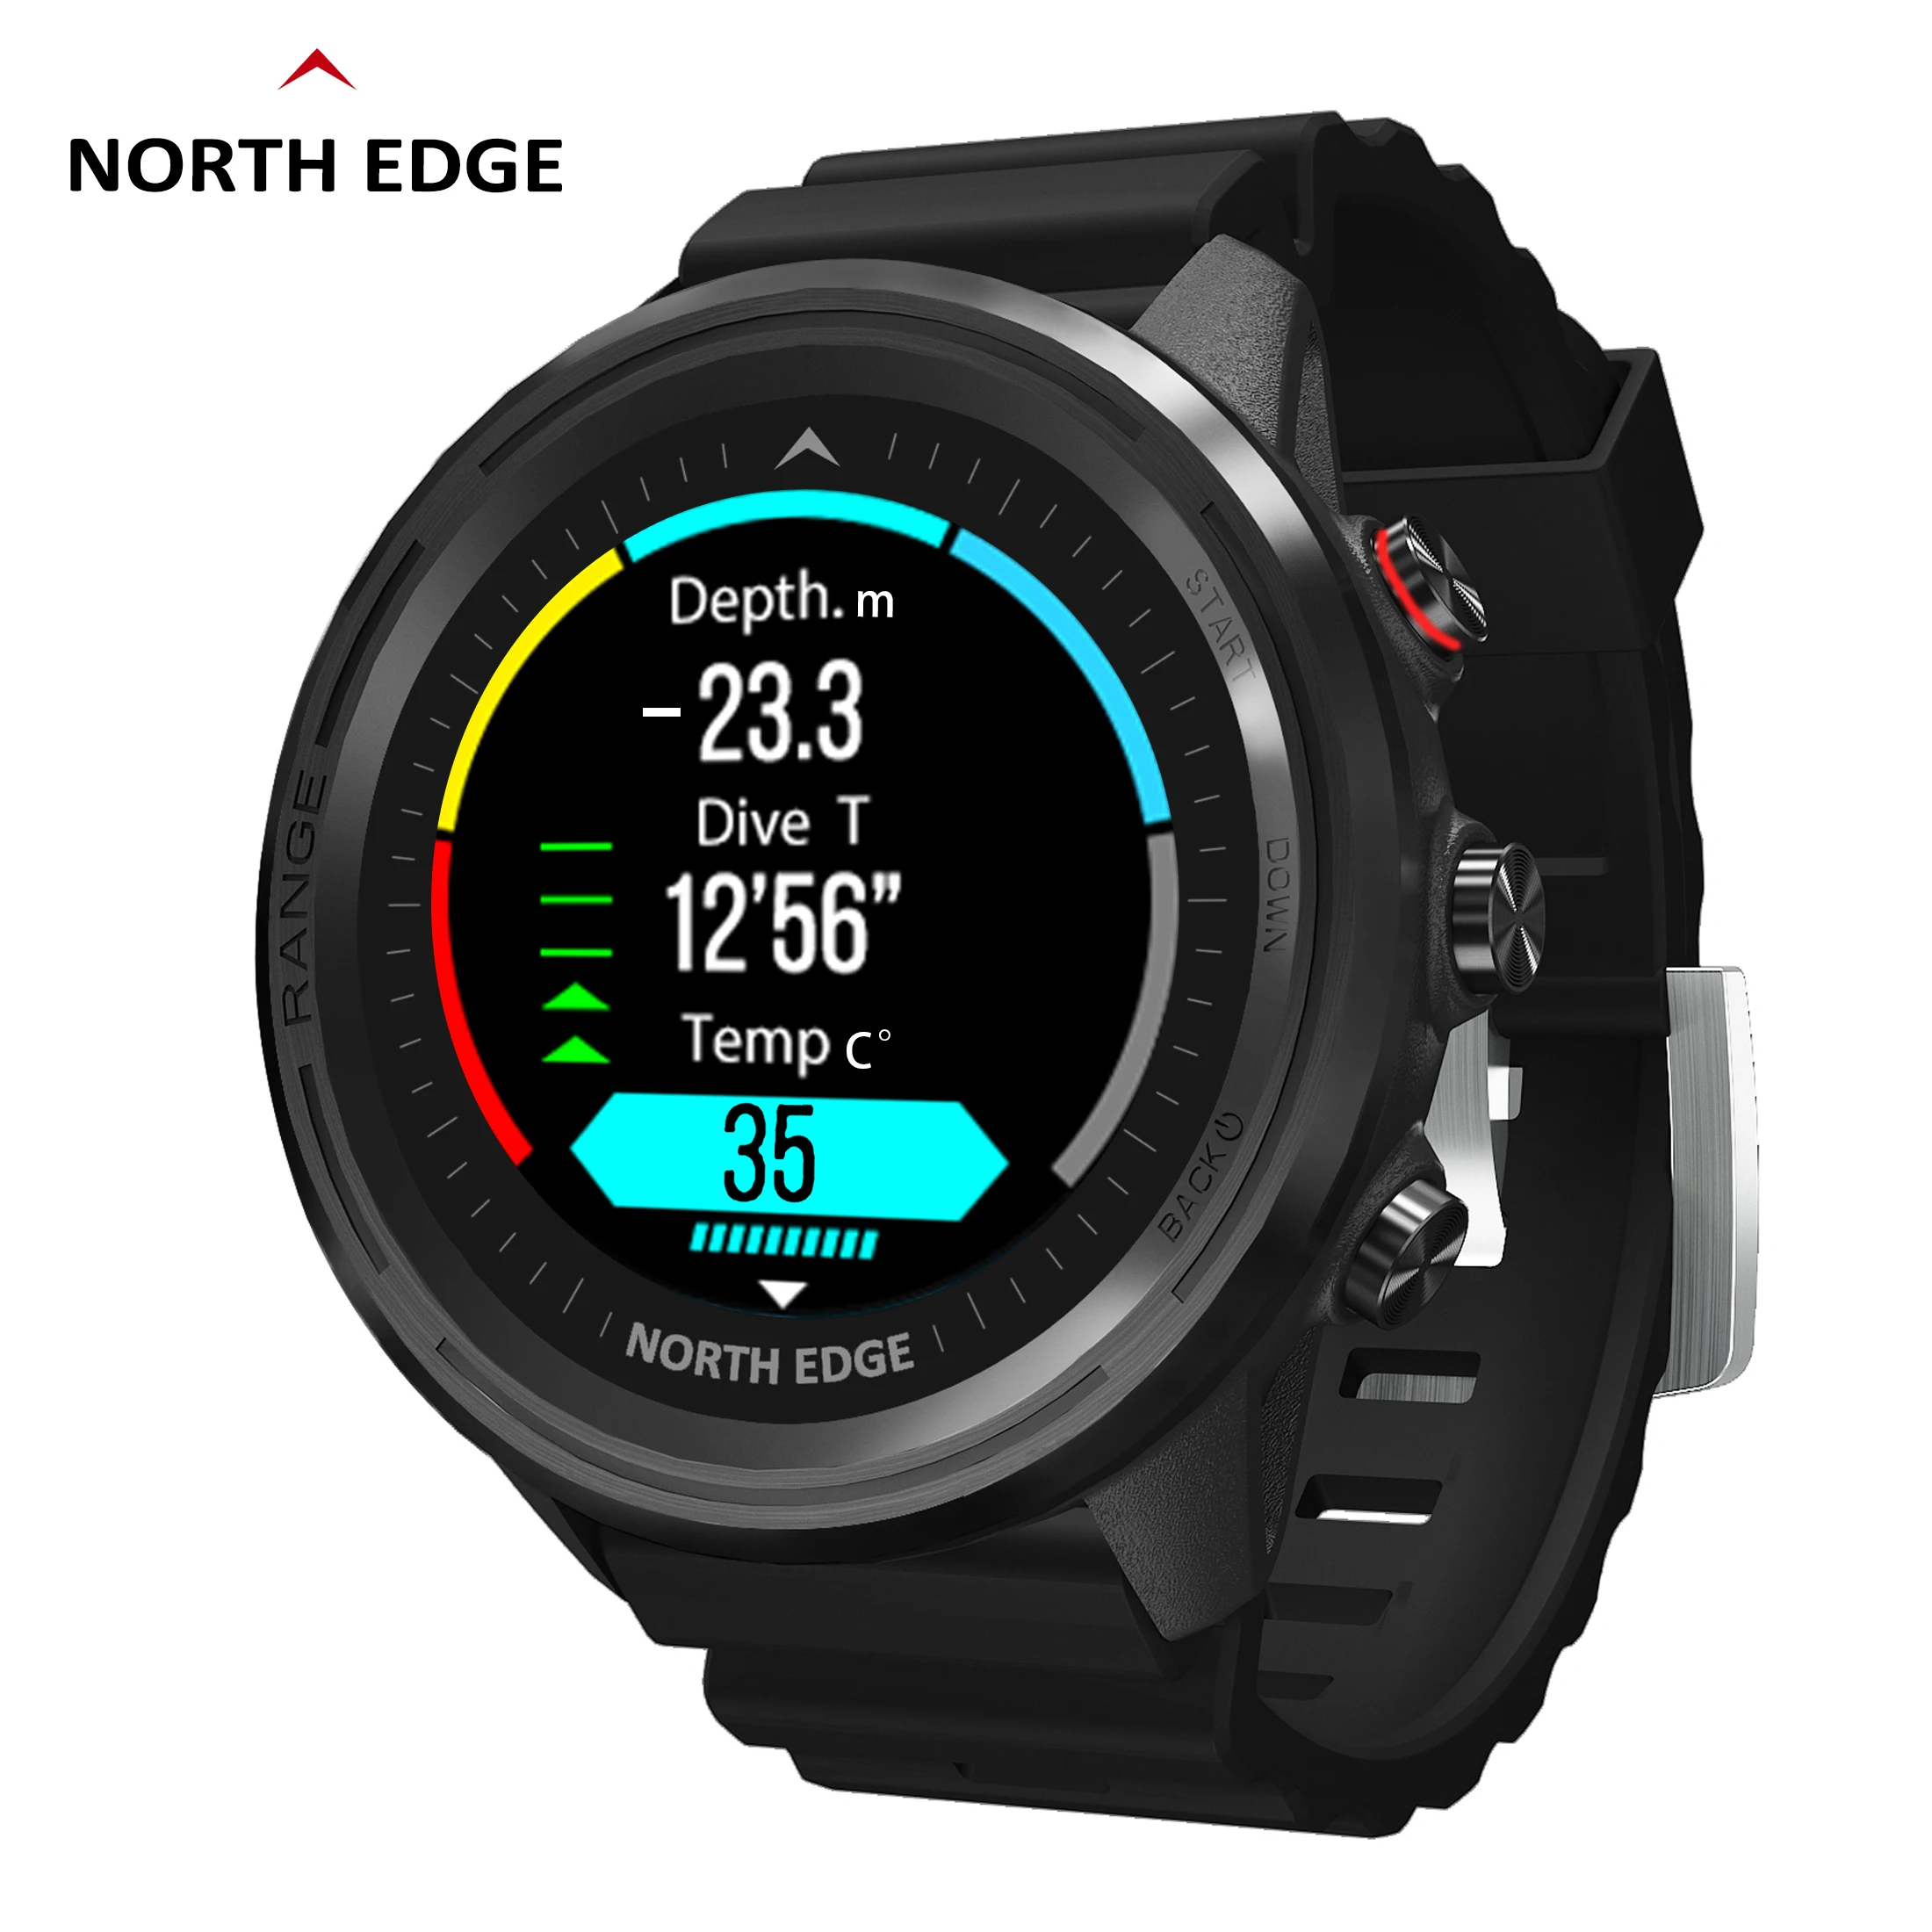 Permalink to NORTH EDGE Mens Smart Watch Smartwatch GPS Men Altitude Barometer Compass Waterproof Dive 50M Full Touch Fitness Outdoor Watches